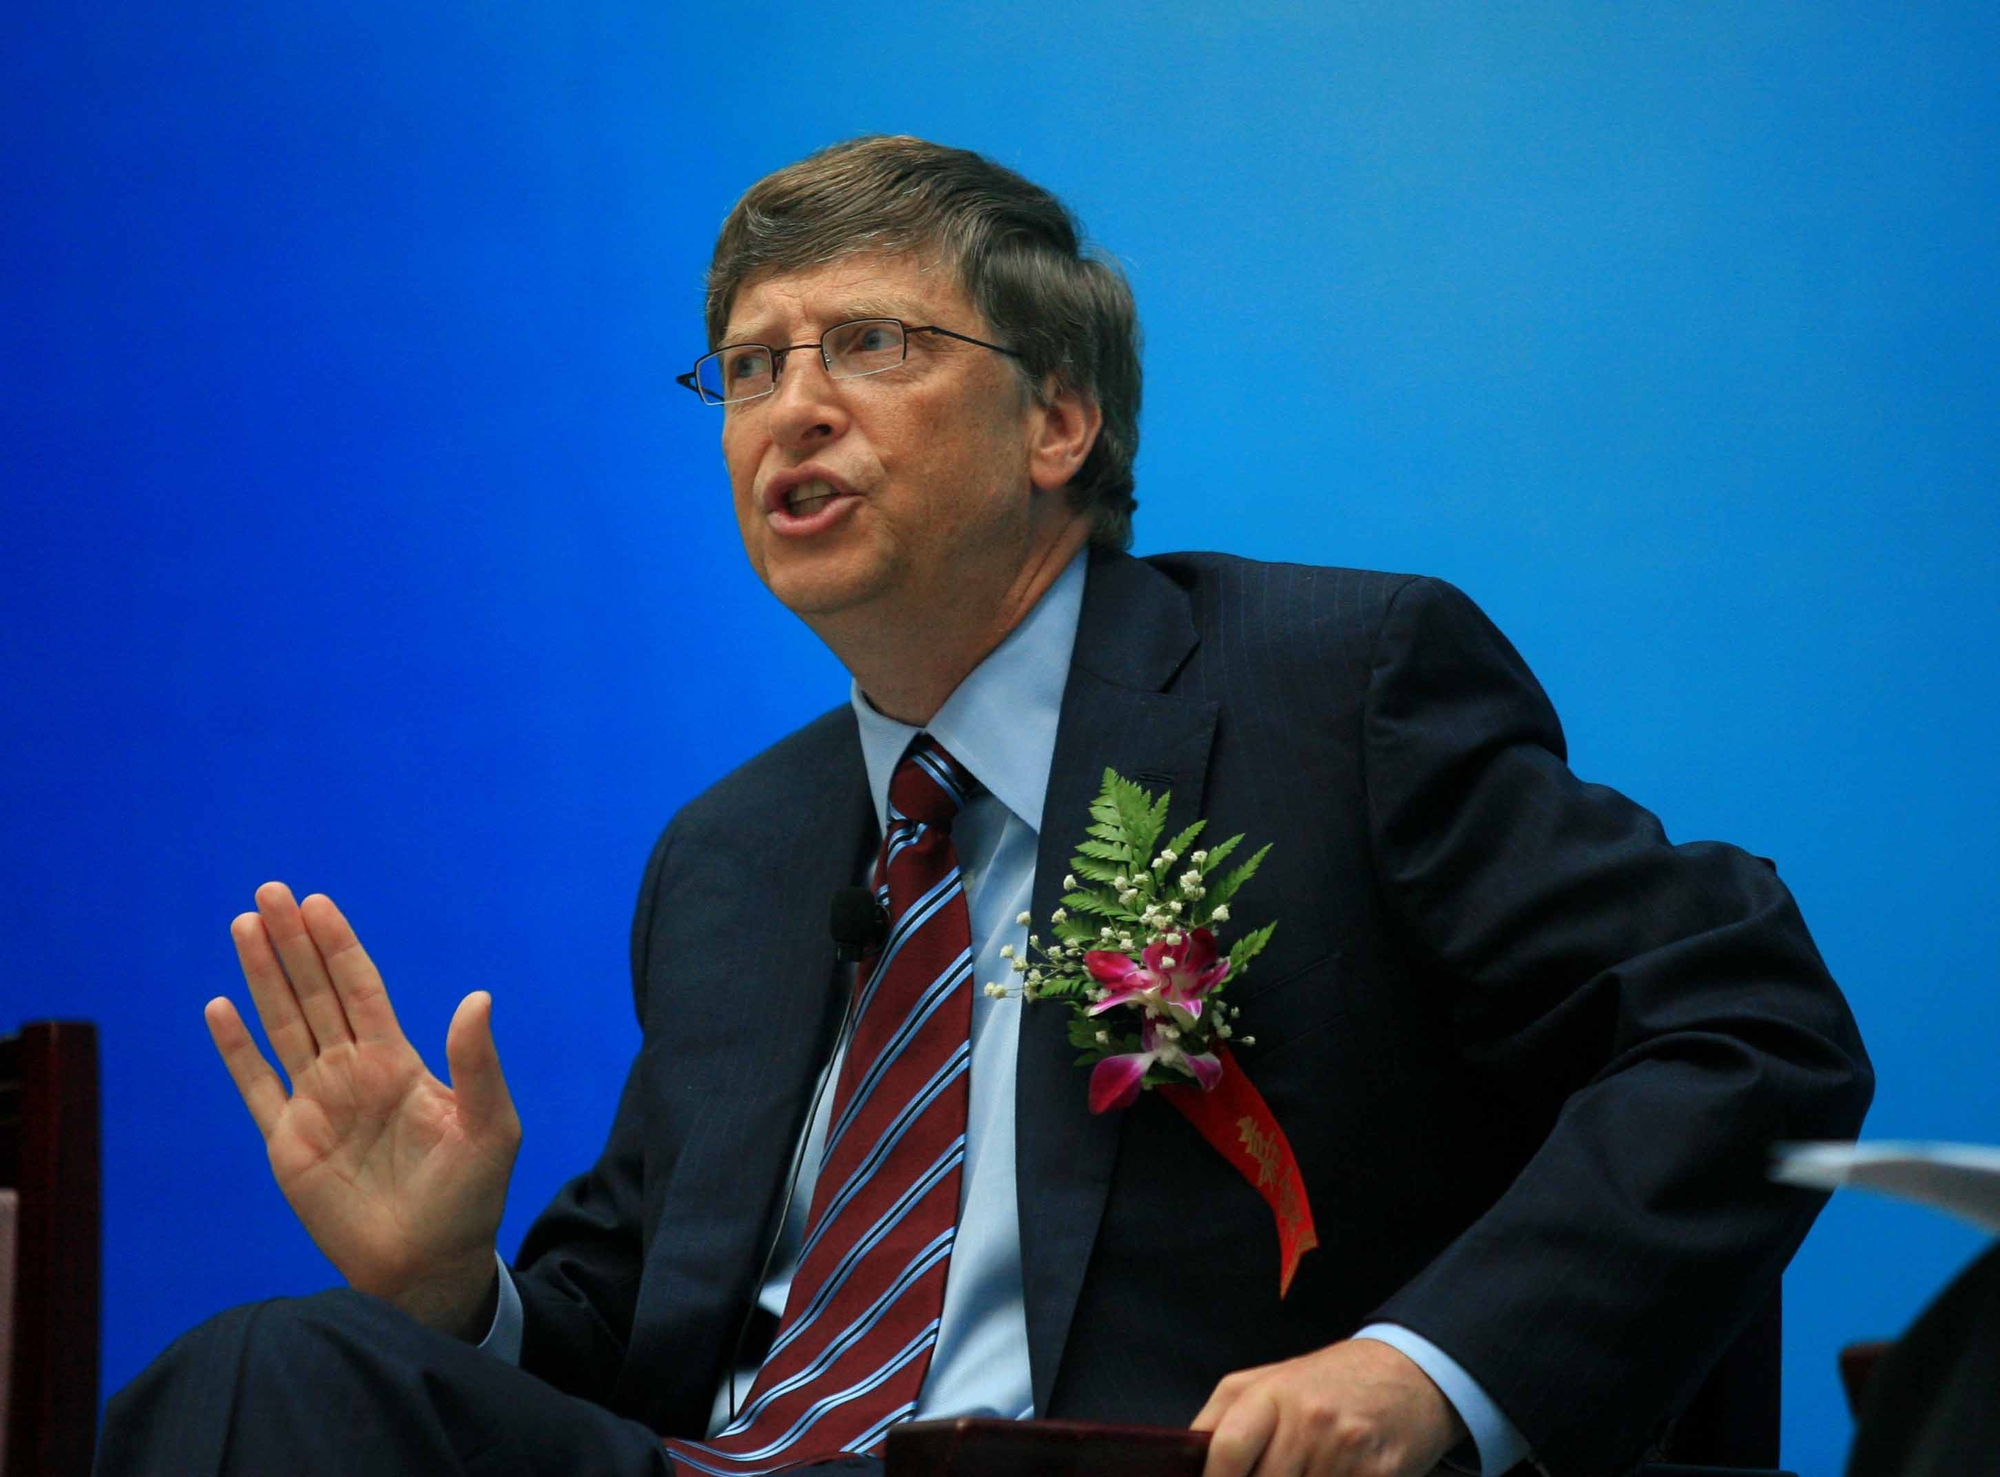 Microsoft Corp. Chairman Bill Gates, speaks at a ceremony that he is awarded the honorary doctorate of Tsinghua University in Beijing Thursday 19 December 2007. After the stop in Tsinghua University, Bill Gates will visit Peking University and attend Microsofts Government Leaders Forum-Asia and Boao Forum.